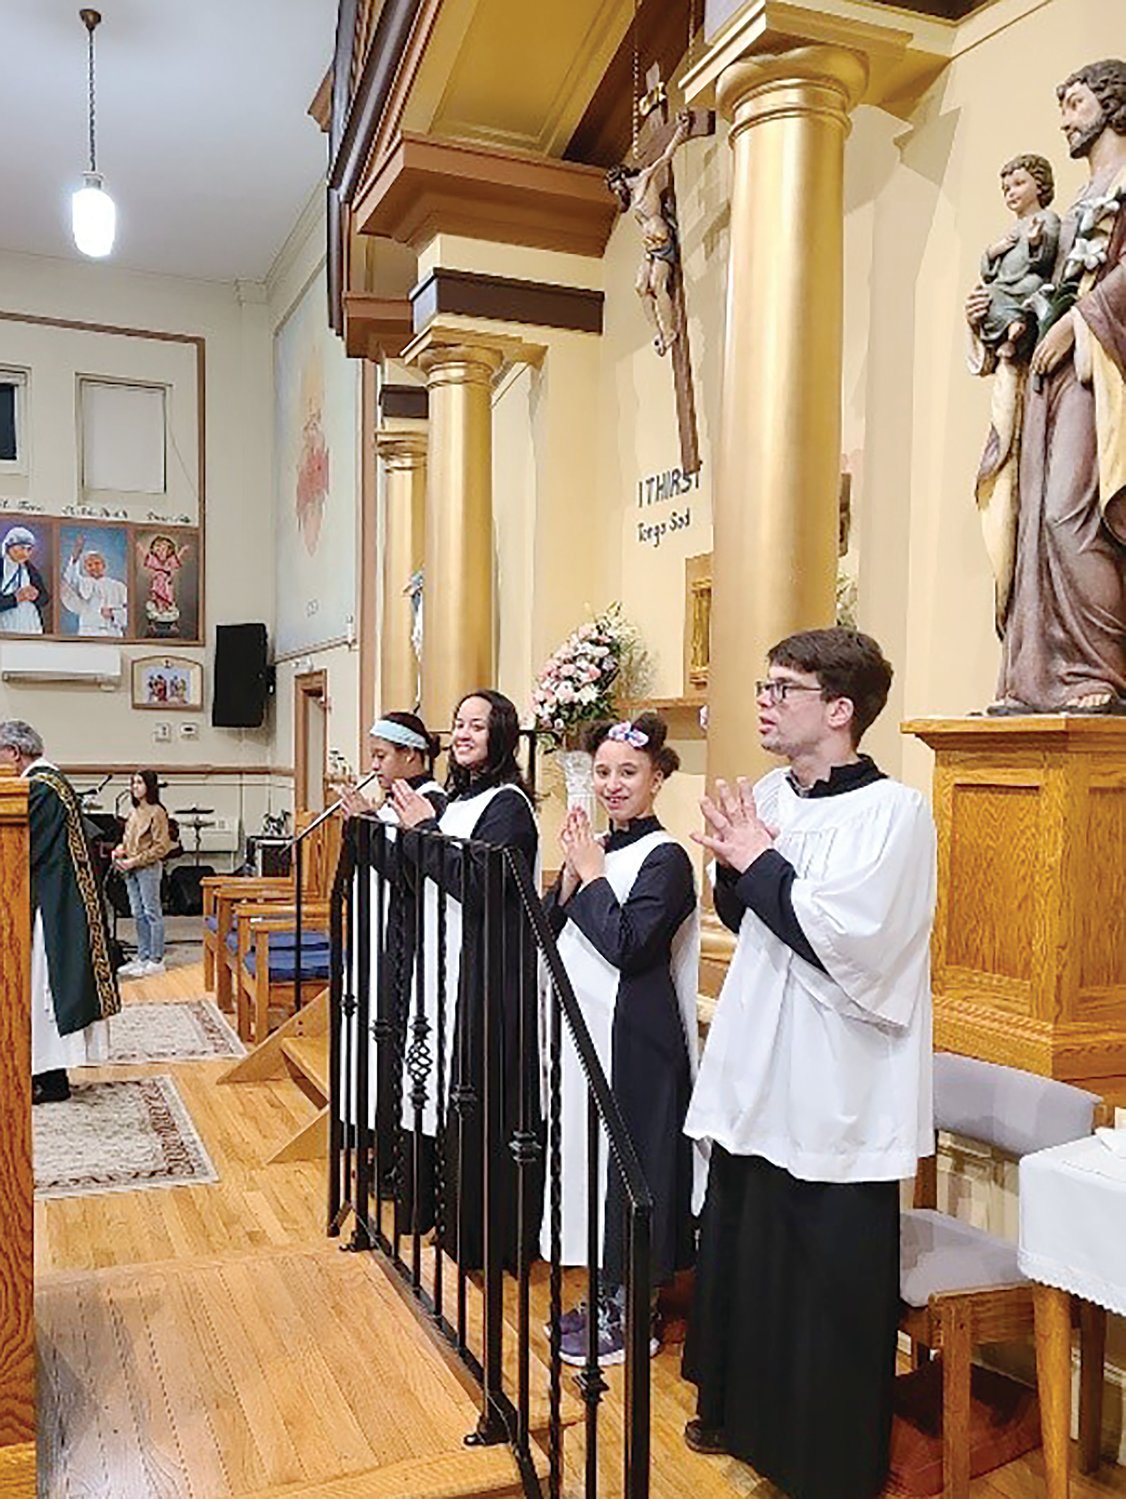 The Special Religious Education (SPRED) Office of the Diocese of Providence helps parishes in Rhode Island better serve those parishioners with intellectual and developmental disabilities. SPRED responds to the needs of individuals on the Autism spectrum, Down syndrome, cerebral palsy, seizure disorders, as well as people with other diagnoses. Pictured, above, SPRED altar servers at St. Patrick Church, Providence.